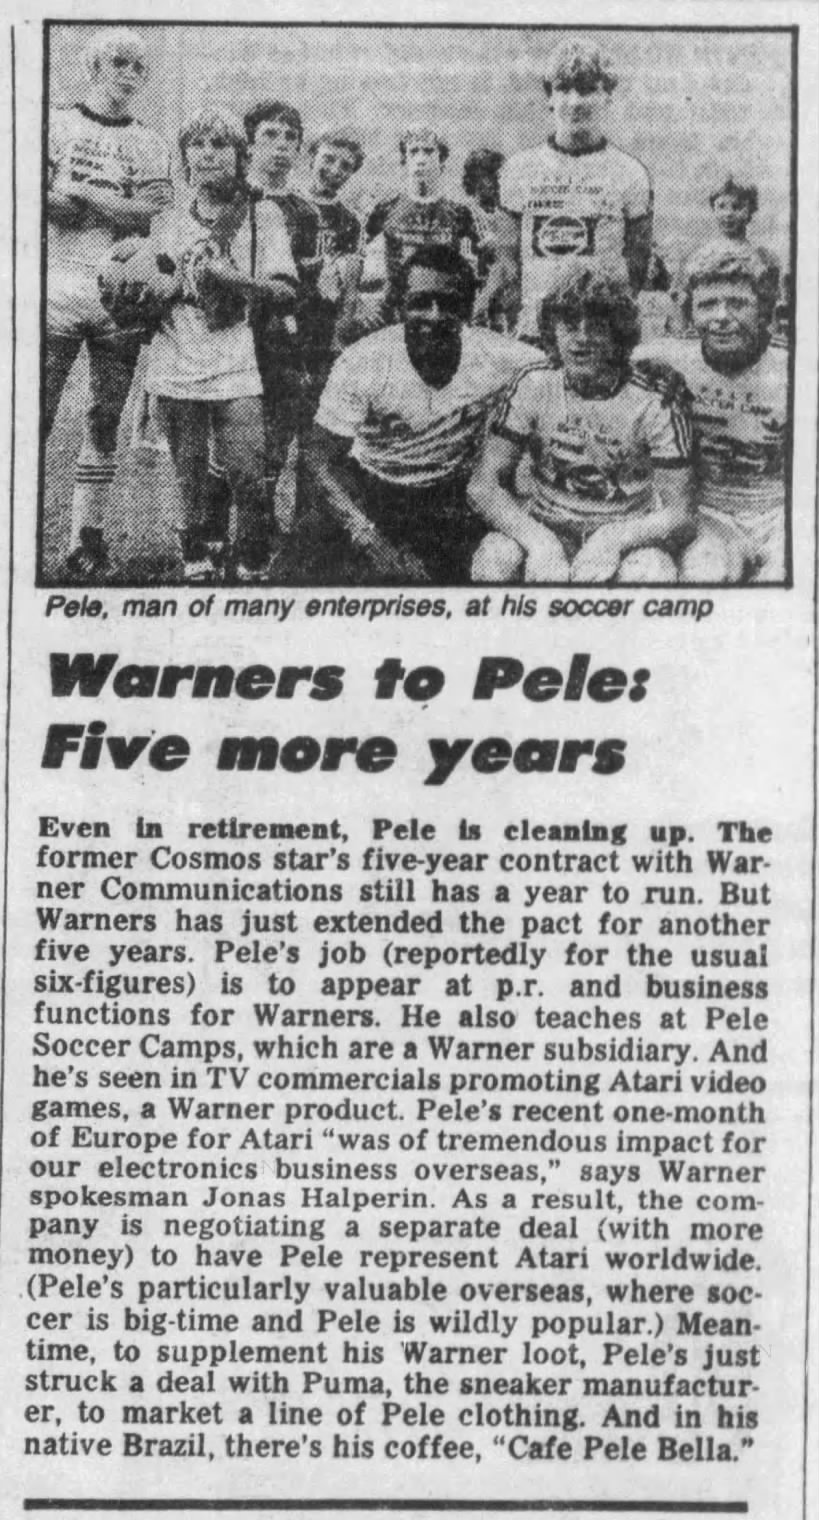 Atari 2600 News: Pele contract extended for 5 more years (Jun 18, 1981)